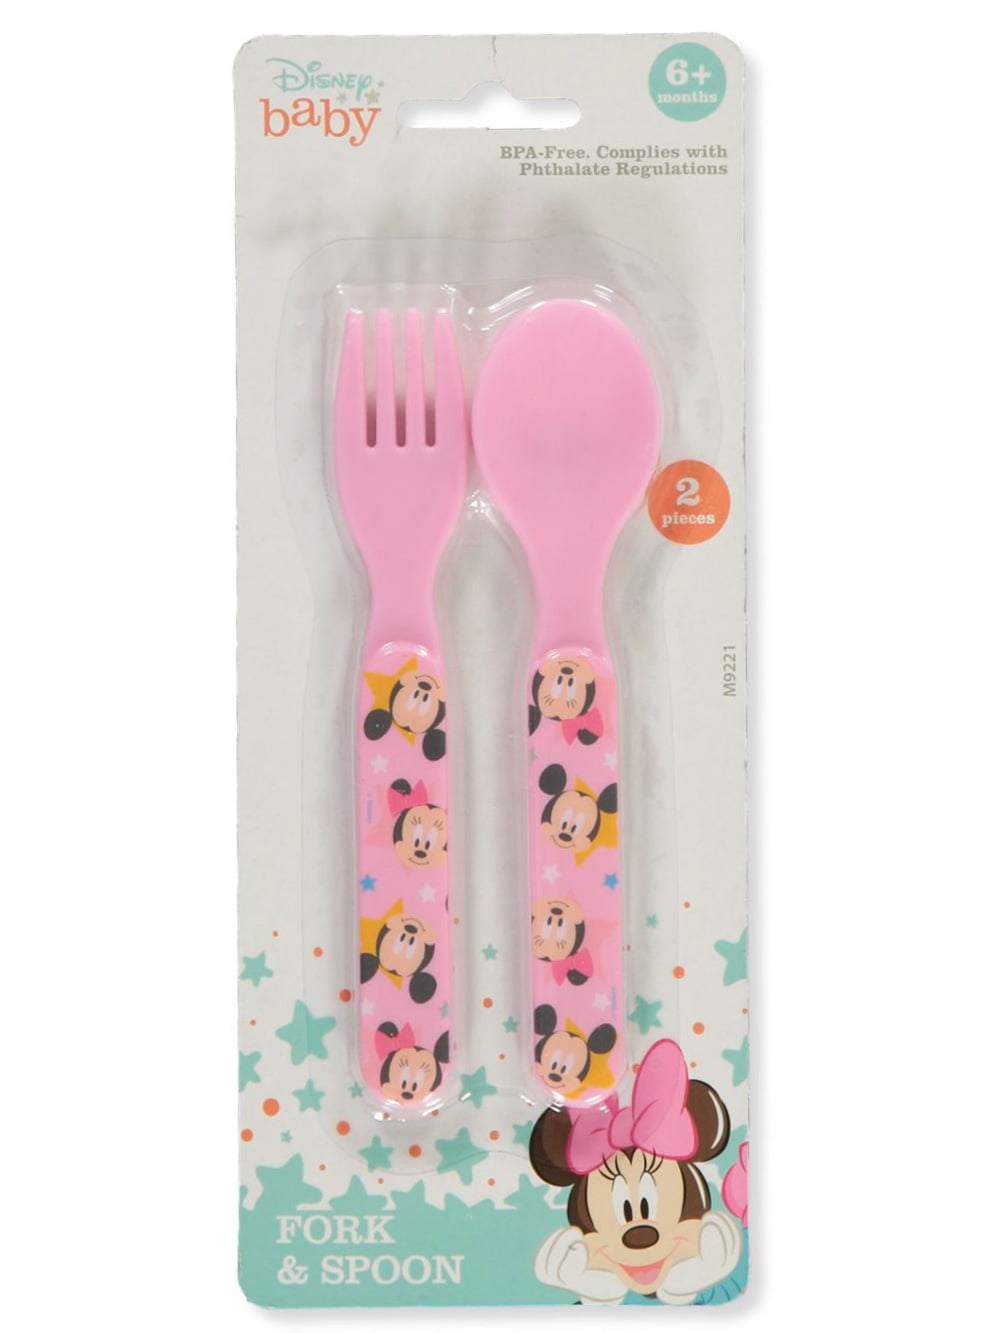 Gerber Graduates Kiddy Cutlery Toddler Forks Pack of 2 Colors may vary 3 ea 